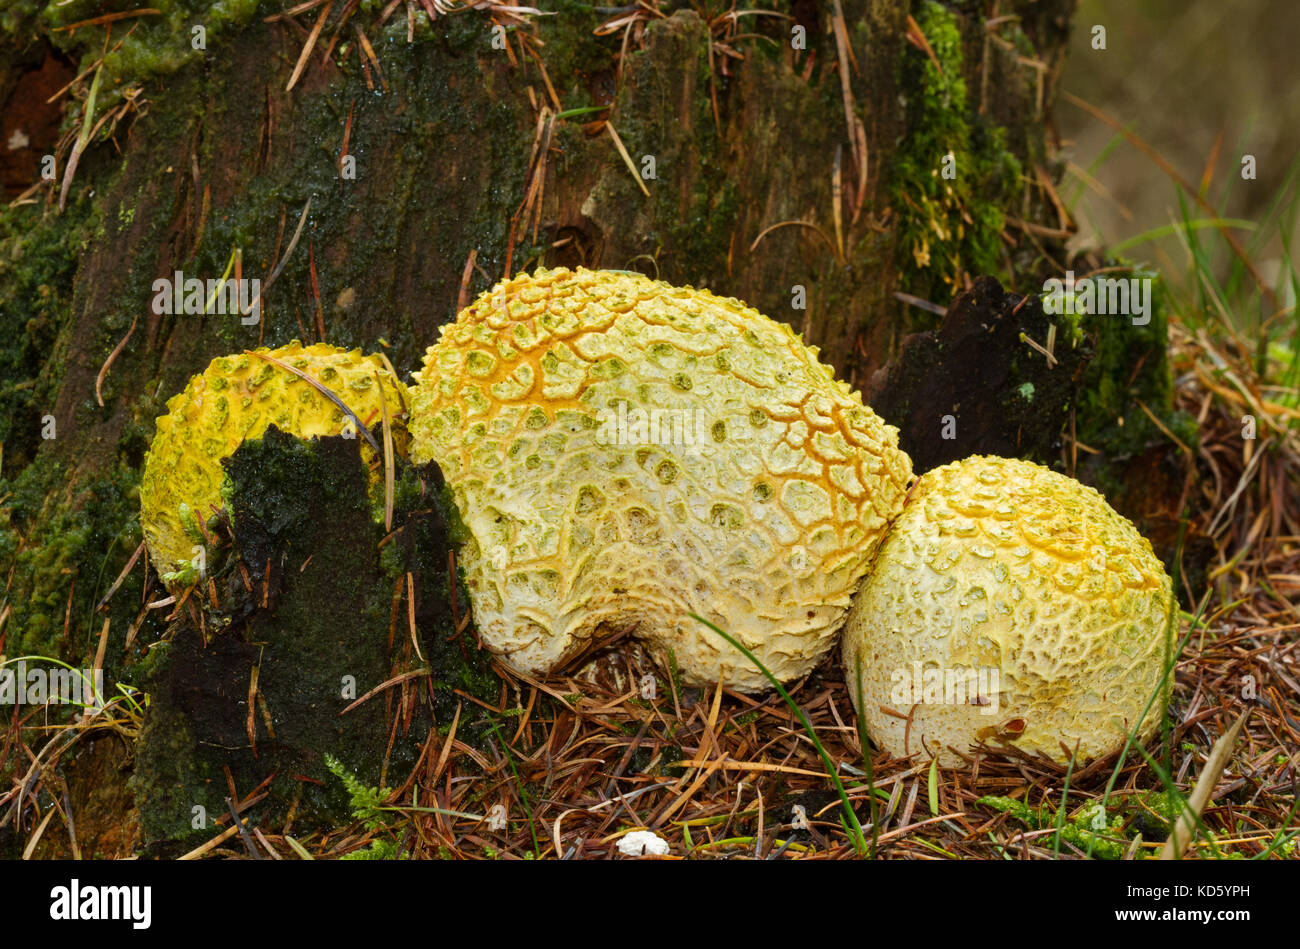 Three Common earthballs or Puffballs at the foot of a rotting tree trunk Stock Photo